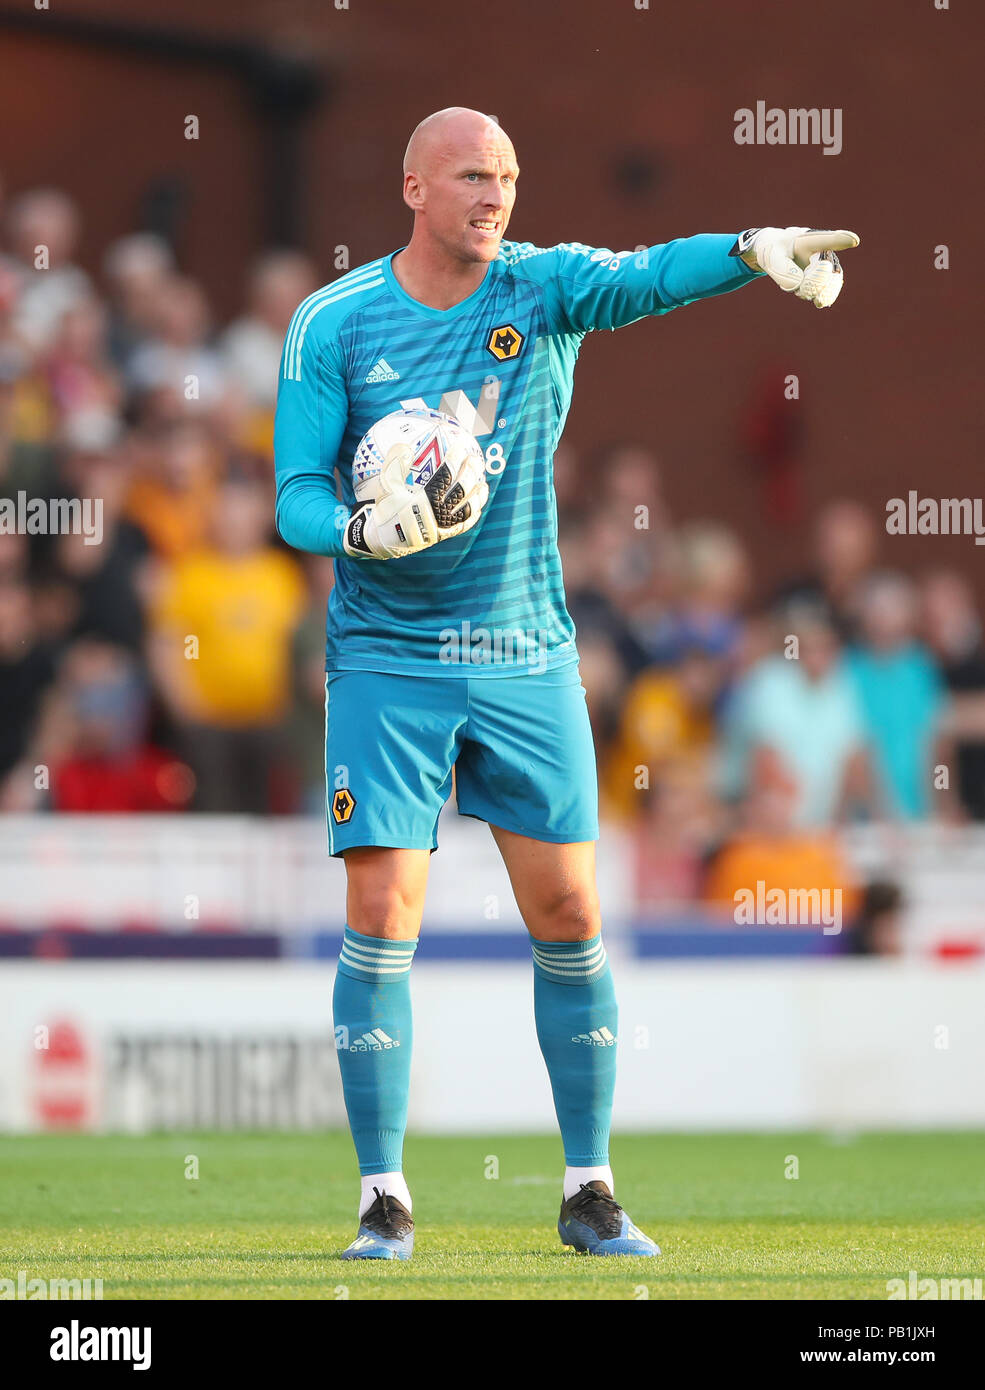 Wolverhampton Wanderers goalkeeper John Ruddy during a pre season friendly match at The Bet365 Stadium, Stoke. PRESS ASSOCIATION Photo. Picture date: Wednesday July 25, 2018. Photo credit should read: Nick Potts/PA Wire. EDITORIAL USE ONLY No use with unauthorised audio, video, data, fixture lists, club/league logos or 'live' services. Online in-match use limited to 75 images, no video emulation. No use in betting, games or single club/league/player publications. Stock Photo